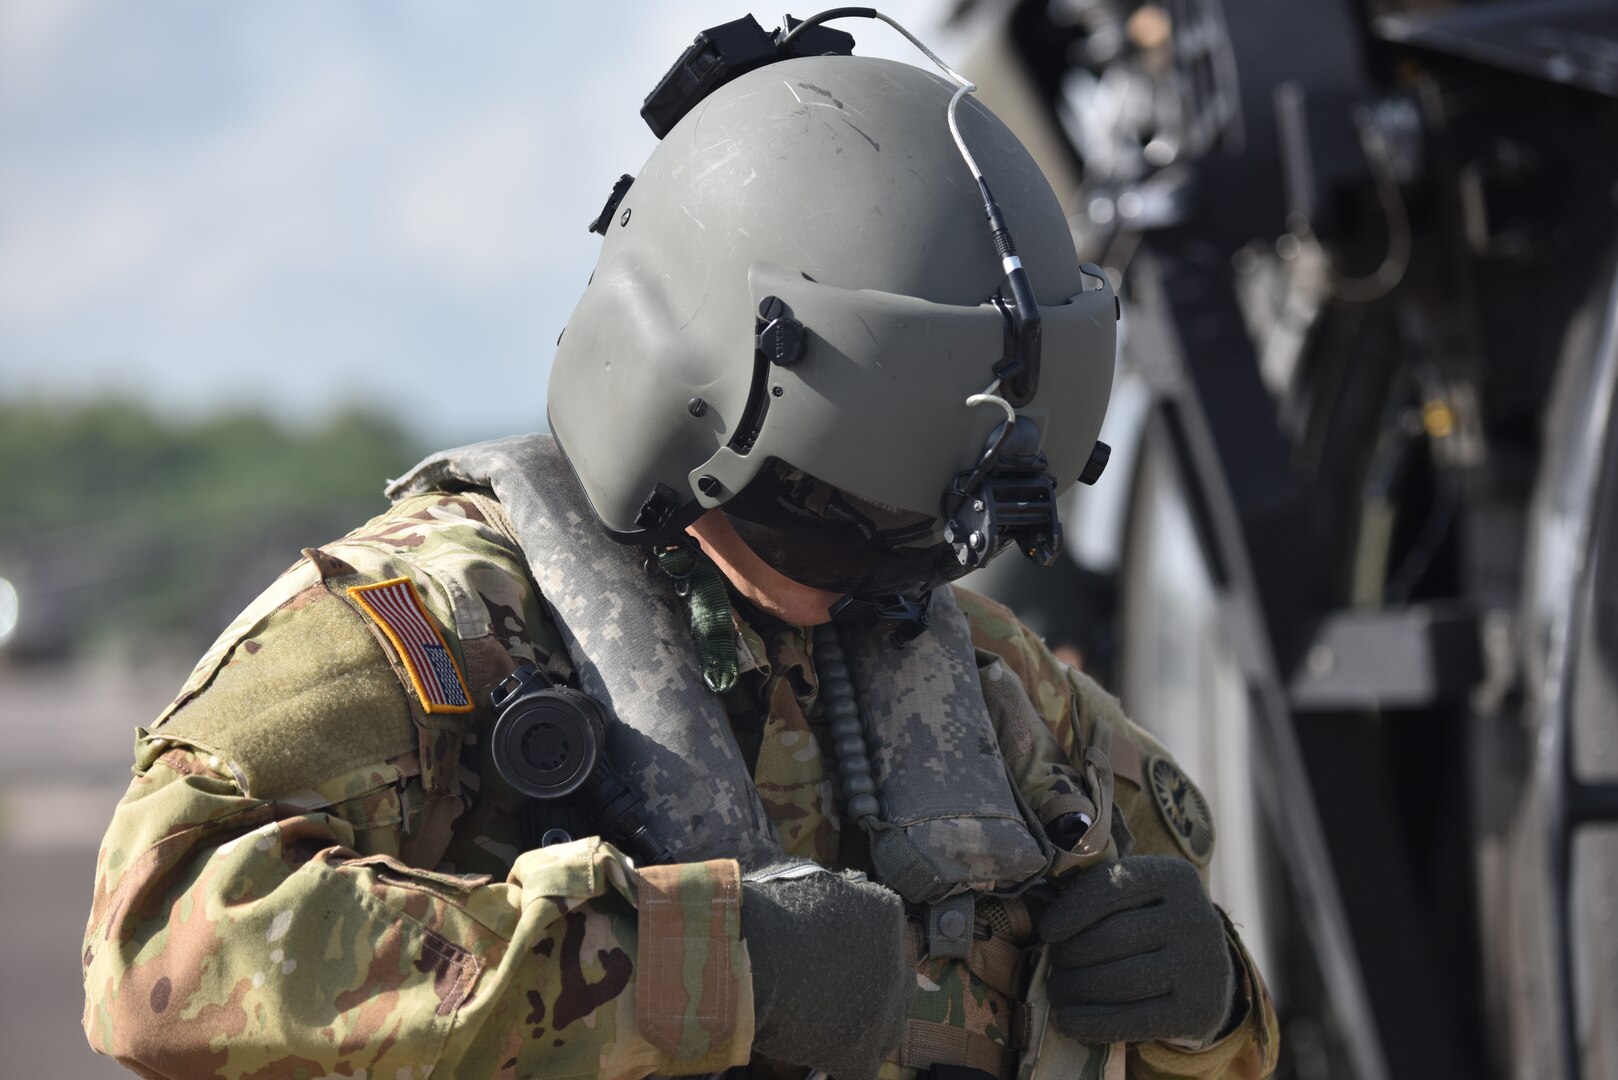 U.S. Army 1st Lt. Ian Gidcomb, a pilot assigned to the 1st Battalion 228th Aviation Regiment Air Ambulance Detachment at Joint Task Force-Bravo, secures his flight vest at Soto Cano Air Base, Honduras July 31, 2020. Gidcomb served as a co-pilot in the third aeromedical evacuation mission.